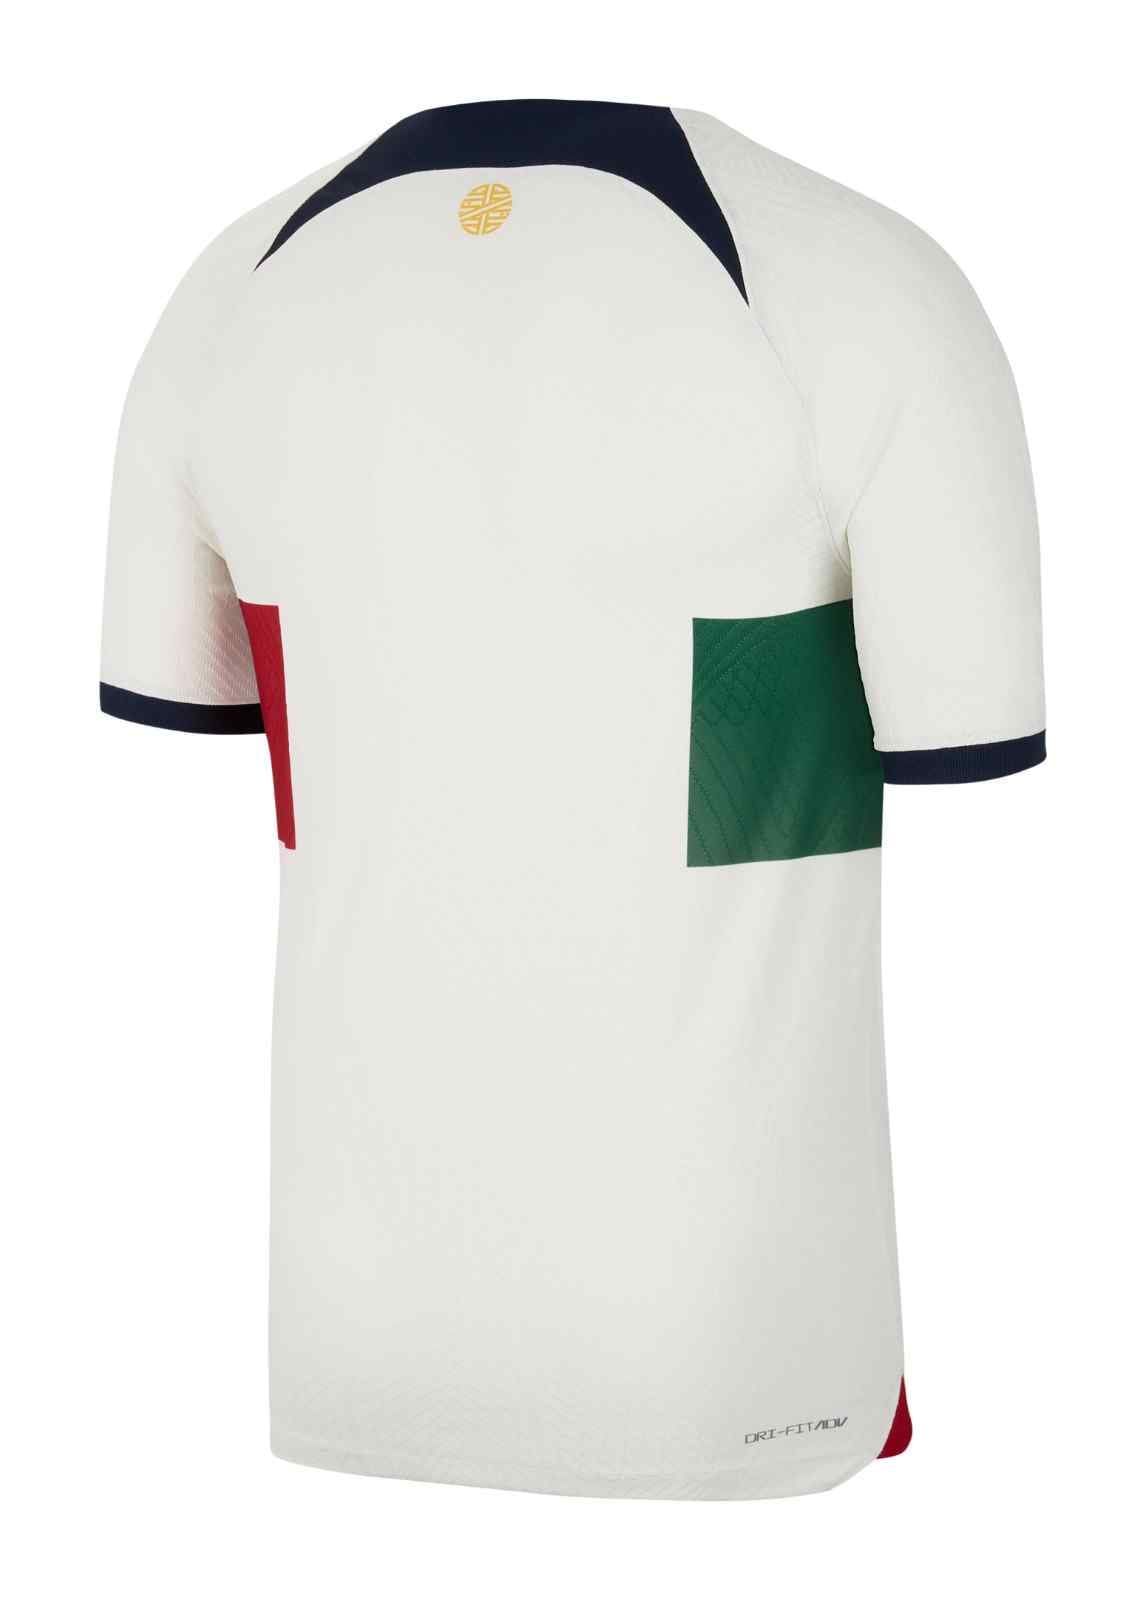 Nike-Portugal-2022-FIFA-World-Cup-Away-Kit-released